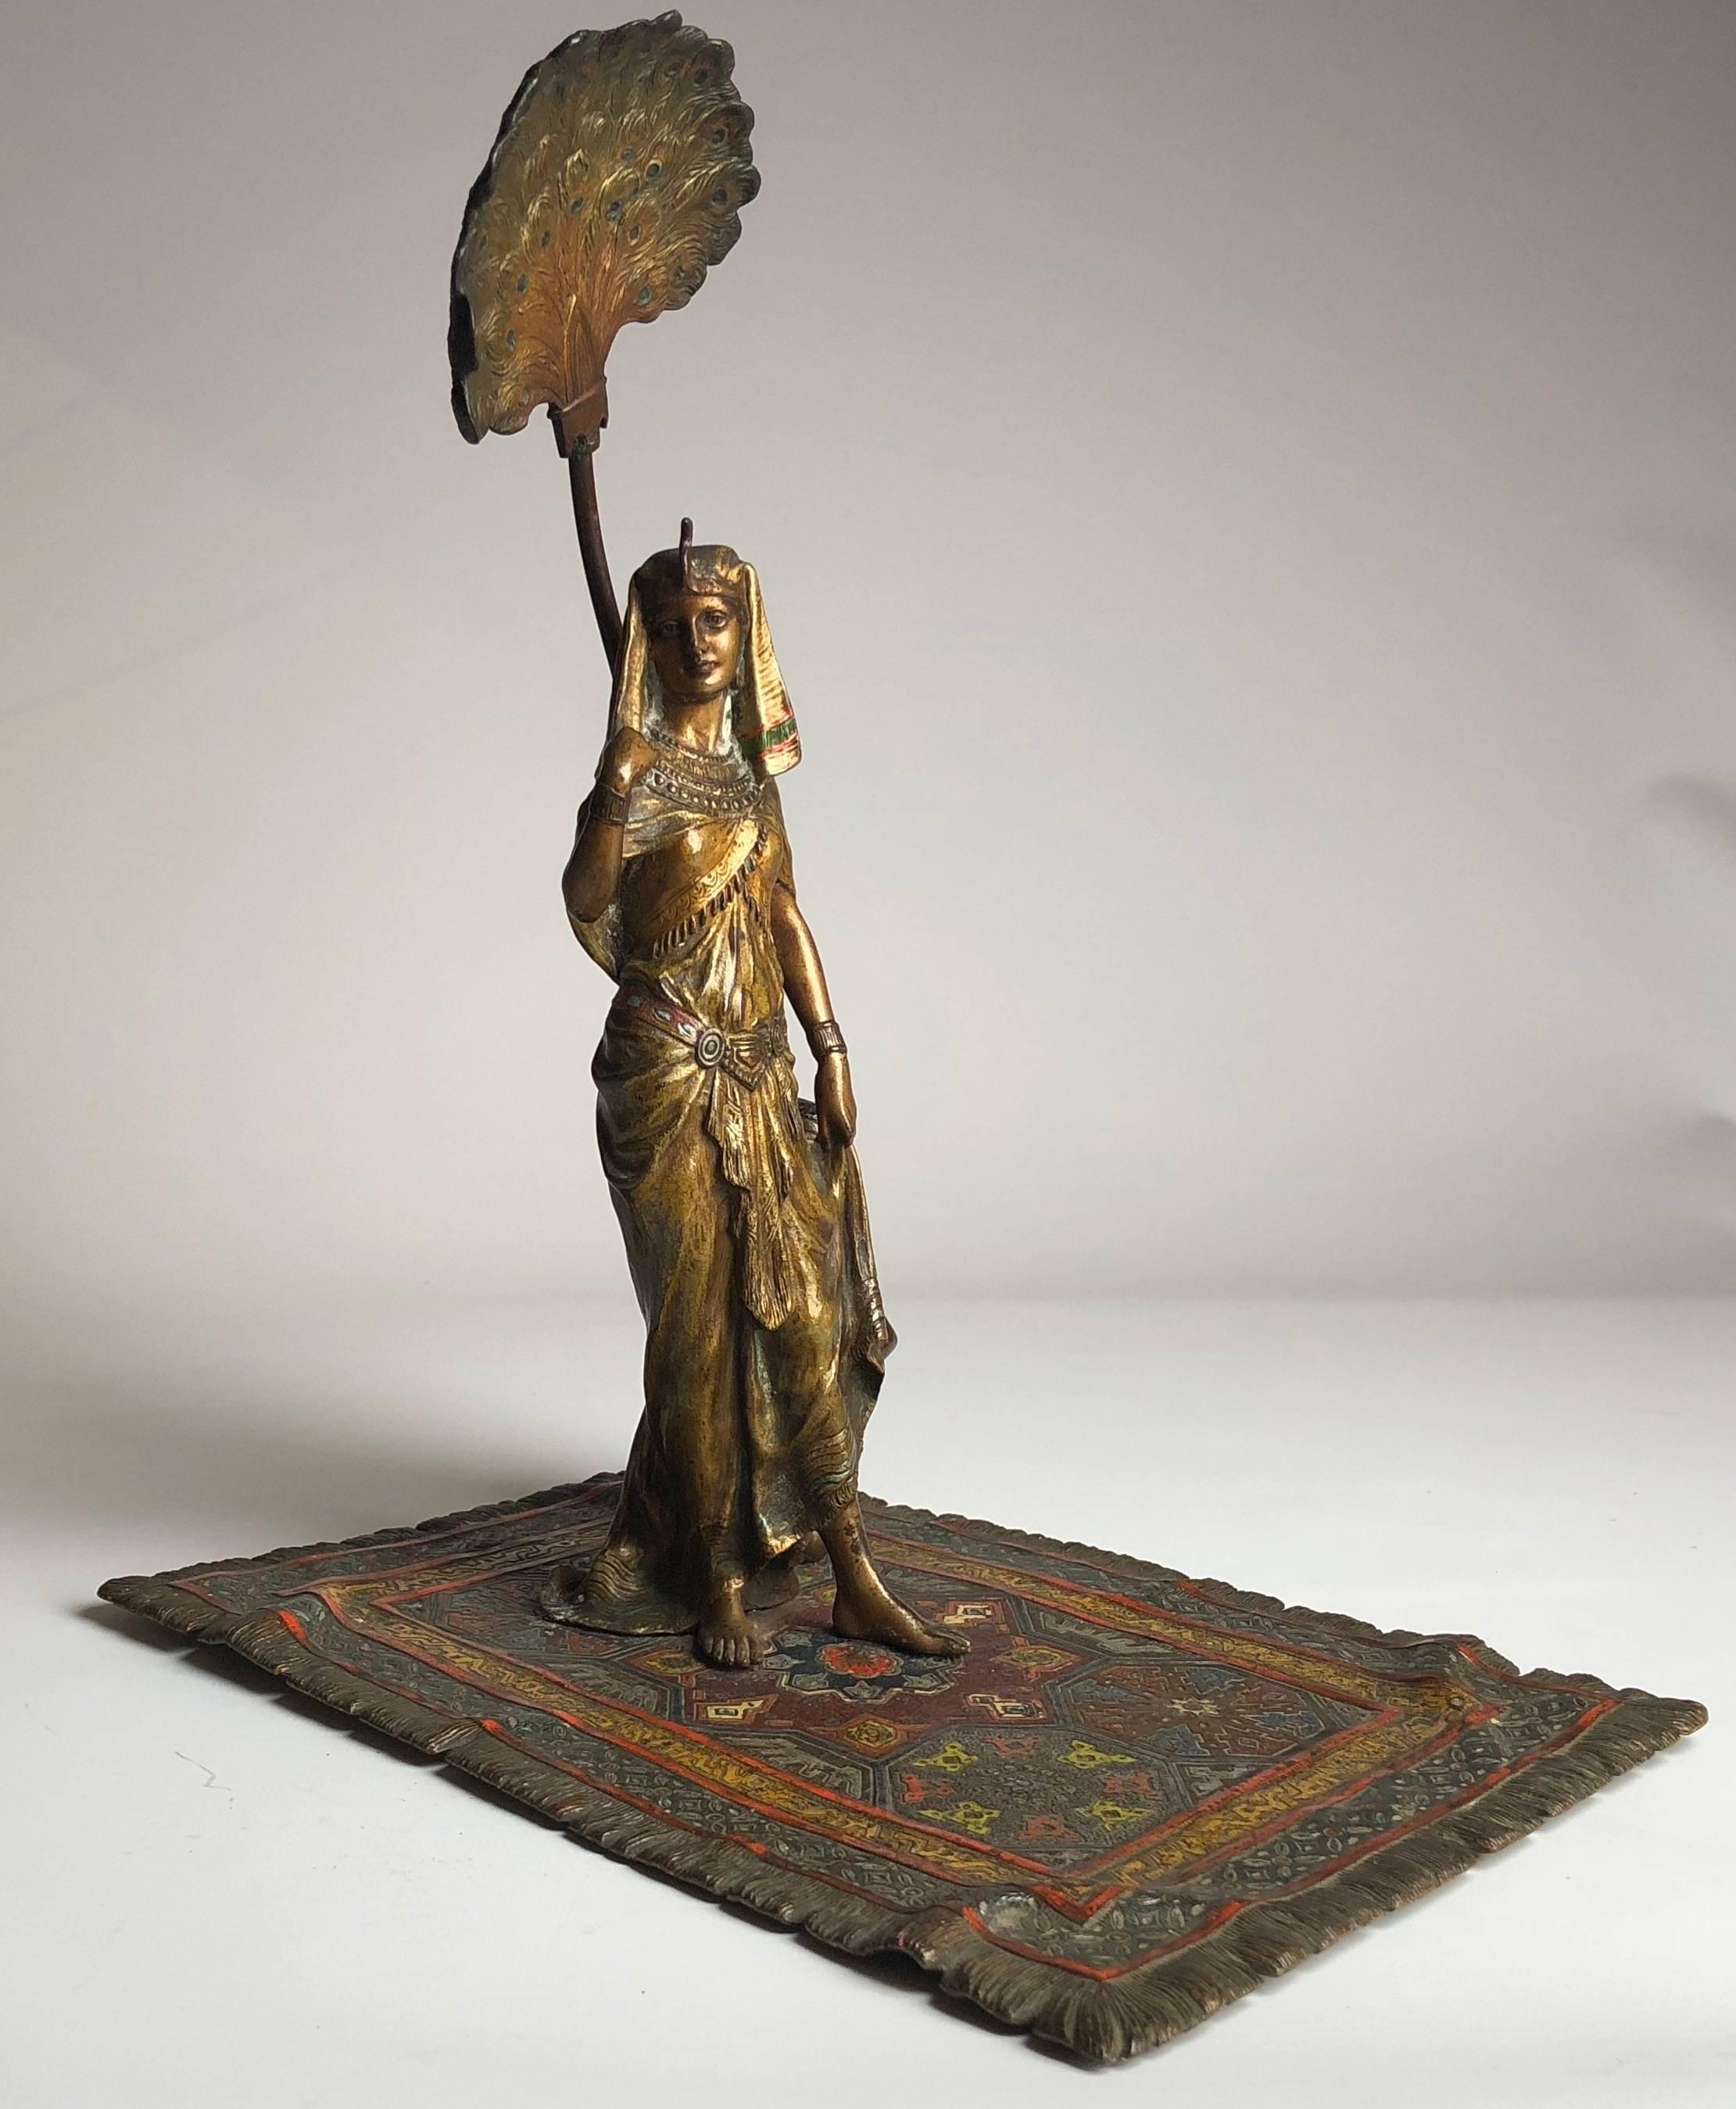 A superb early 20th century cold painted Austrian bronze study of Egyptian queen on carpet with servant boy holding peacock feather sun shade, circa 1900

Stamped with the Bergman foundry mark and signed Nam Greb.

The piece measures 10